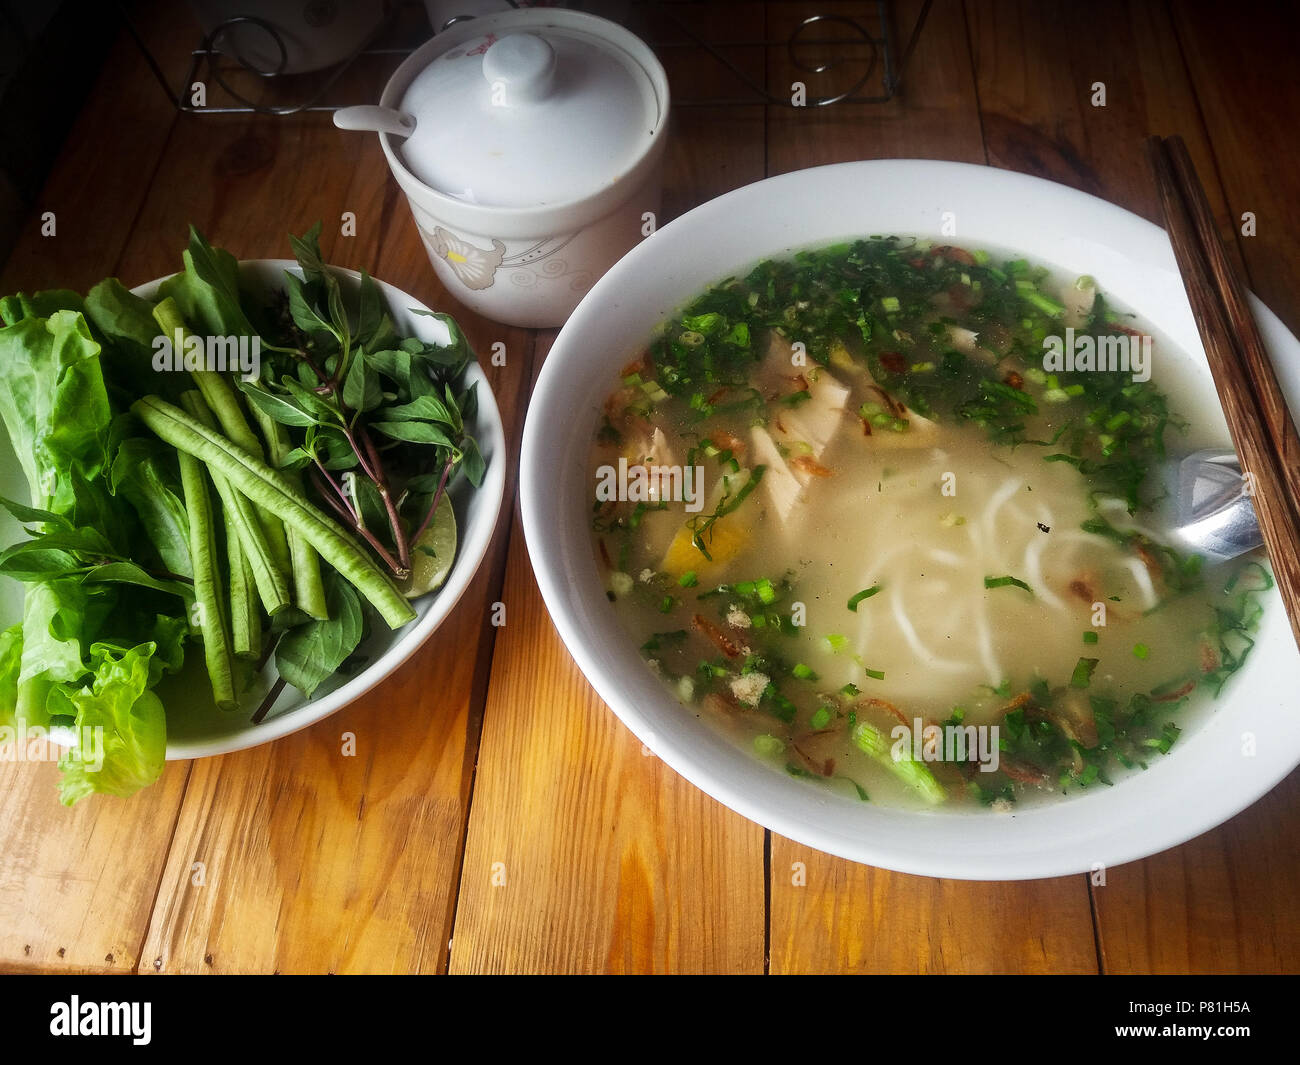 Kow piak seen or the traditional Lao egg noodle soup Stock Photo